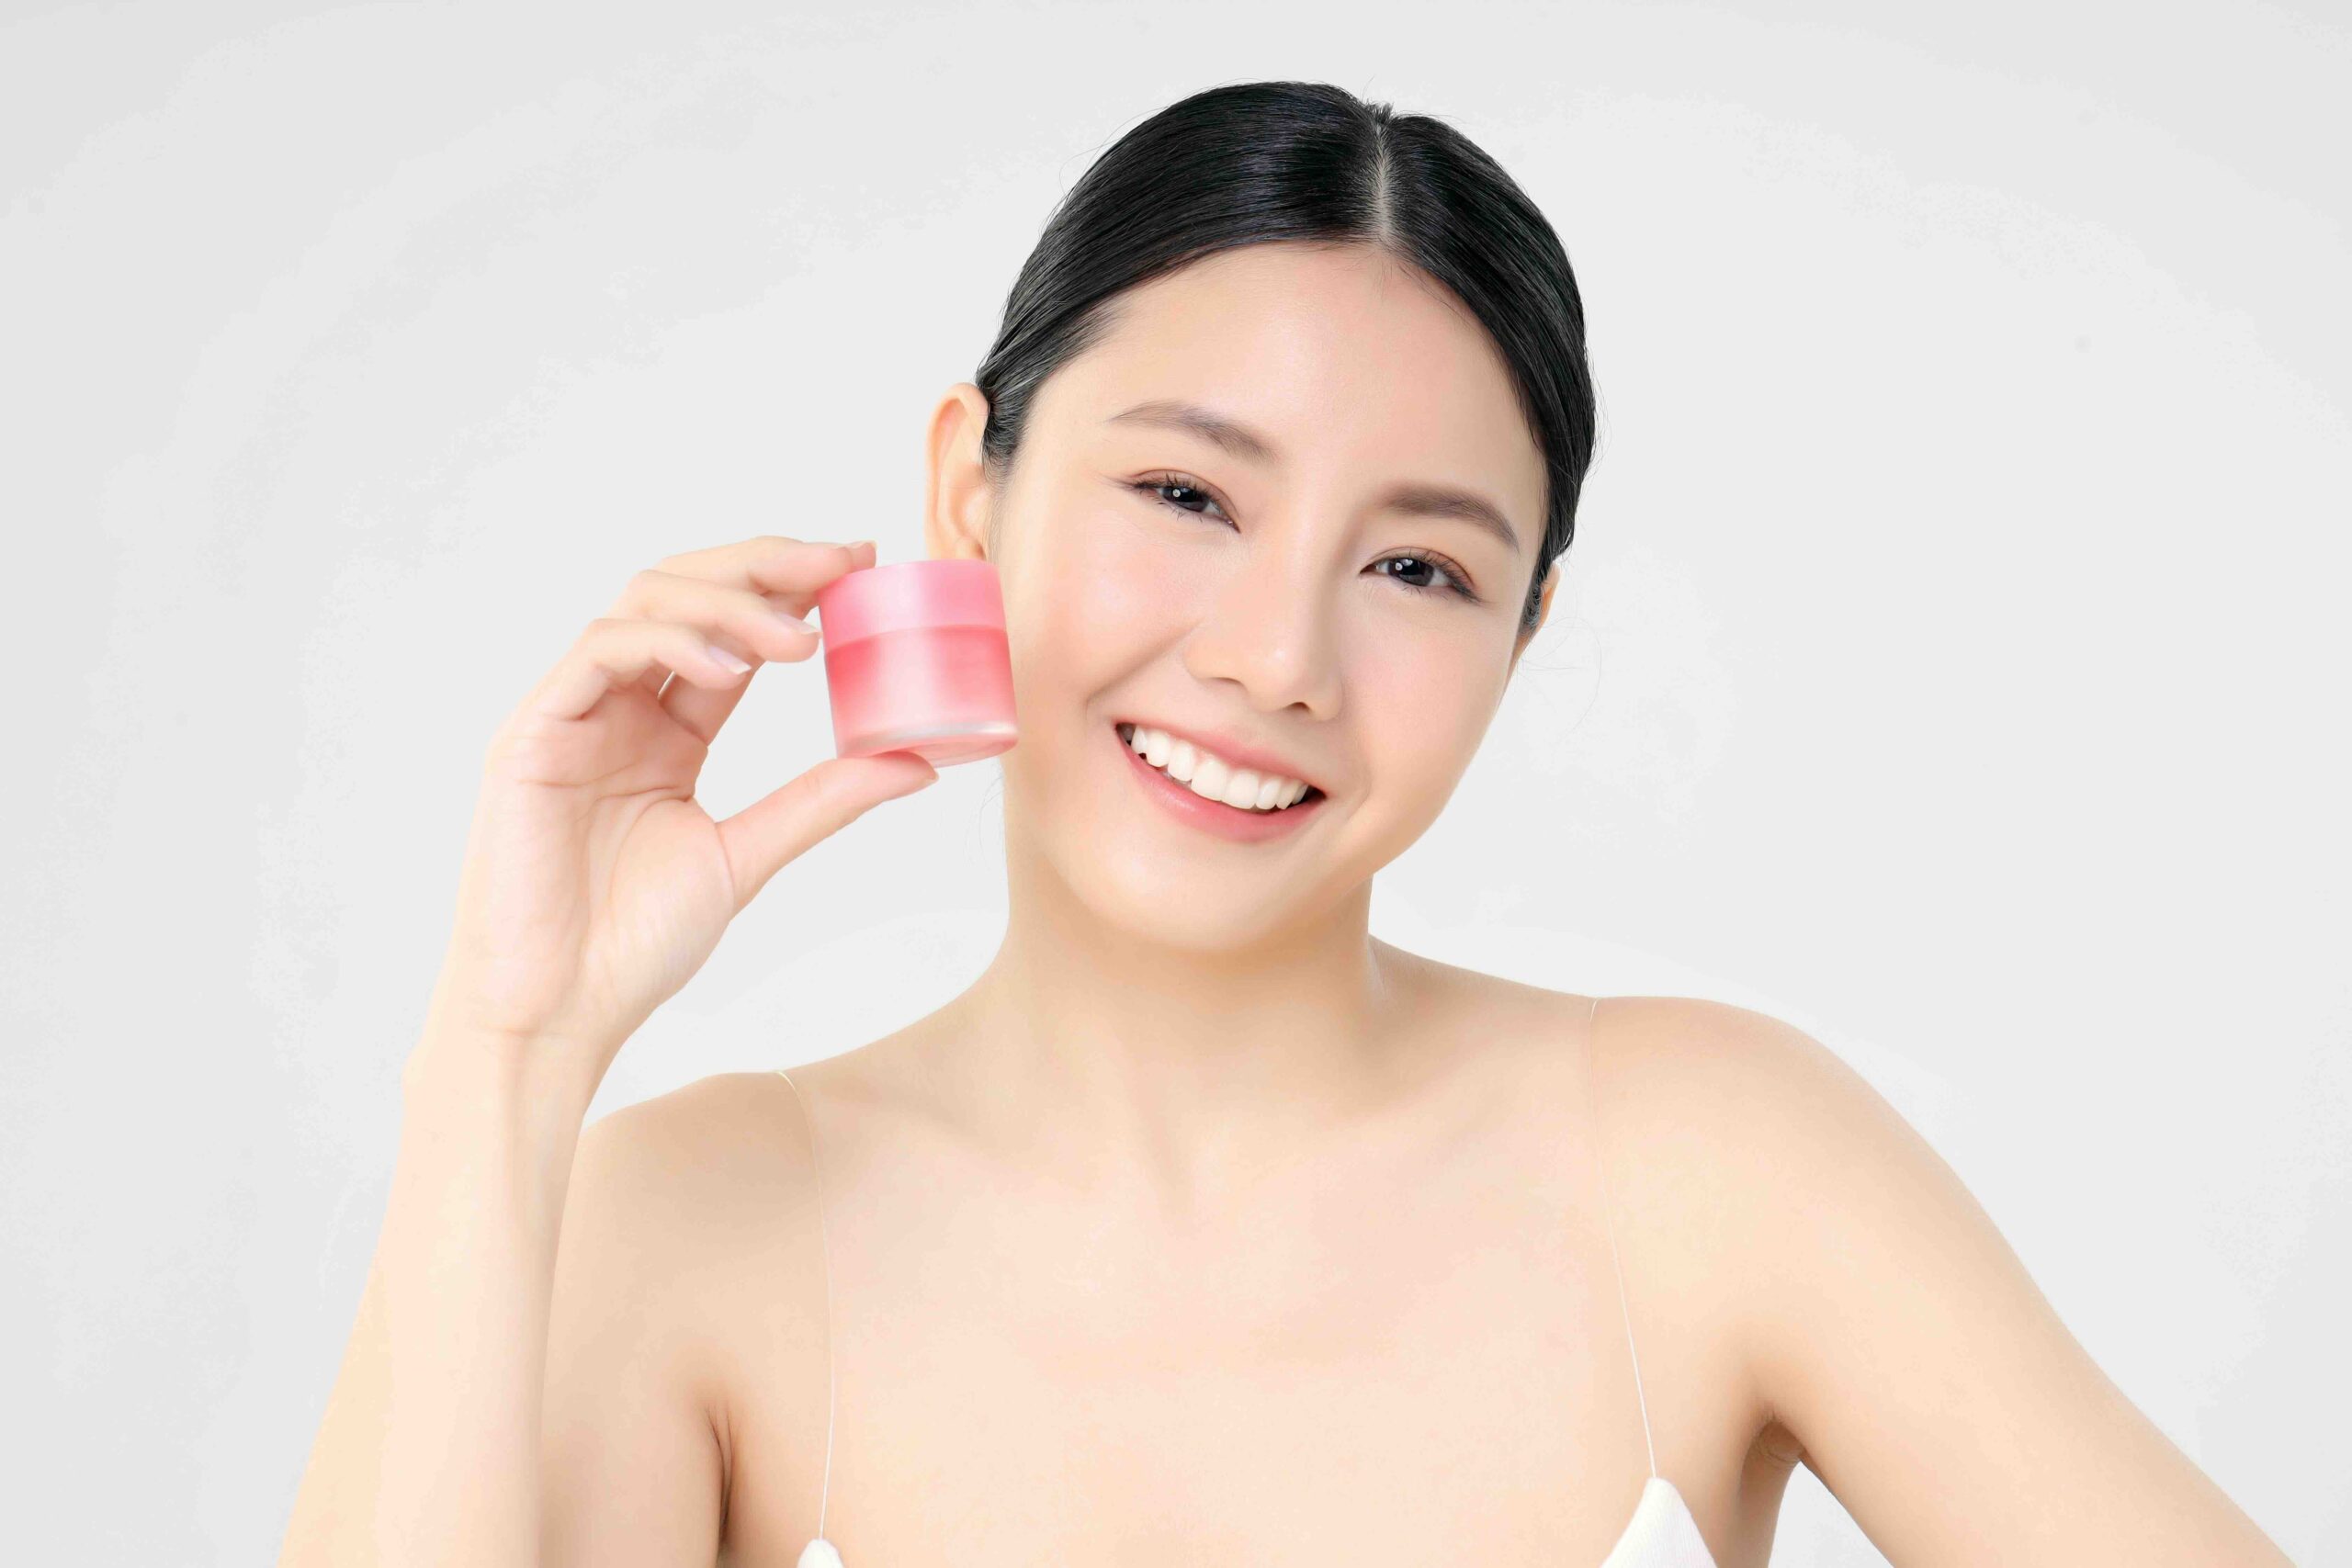 Close Up Beauty Face Asian Woman With Fresh Clean Skin Holding Facial Cream Bottle showing her routine of Korean Skincare. Standing on an Isolated on white background.